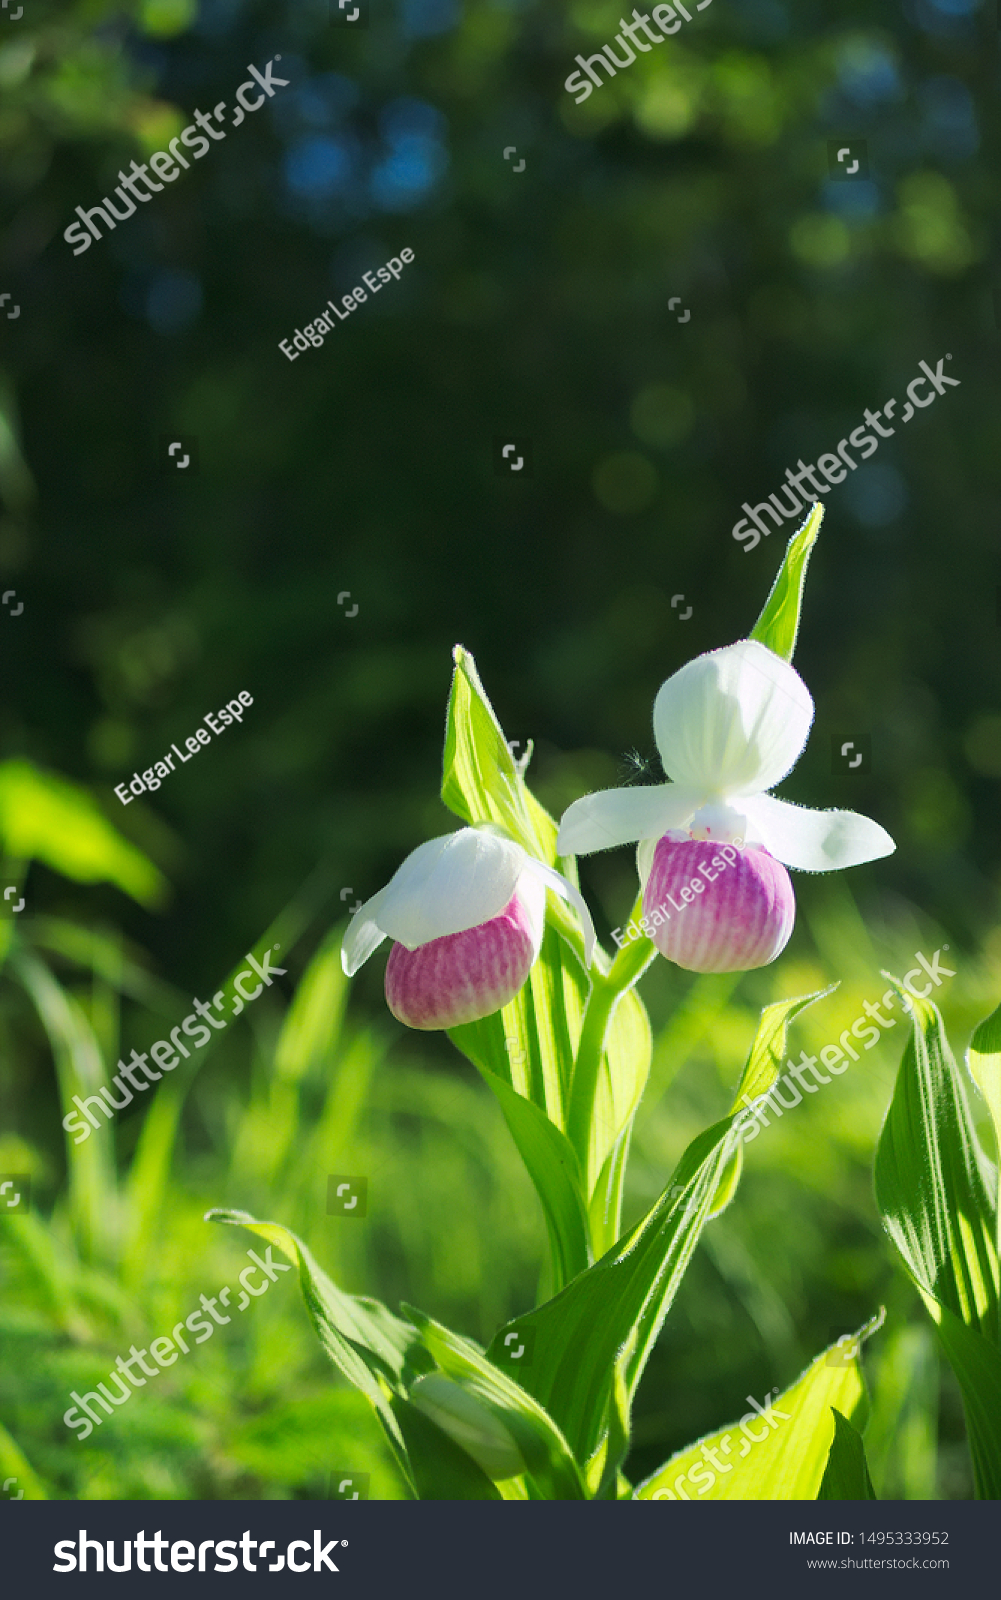 Two Showy Lady's-slippers, Cypripedium reginae, also known as Pink-and-white Lady's-slipper or the Queen's Lady's-slipper. Official Minnesota State Flower - portrait of native beautiful blossoms. #1495333952